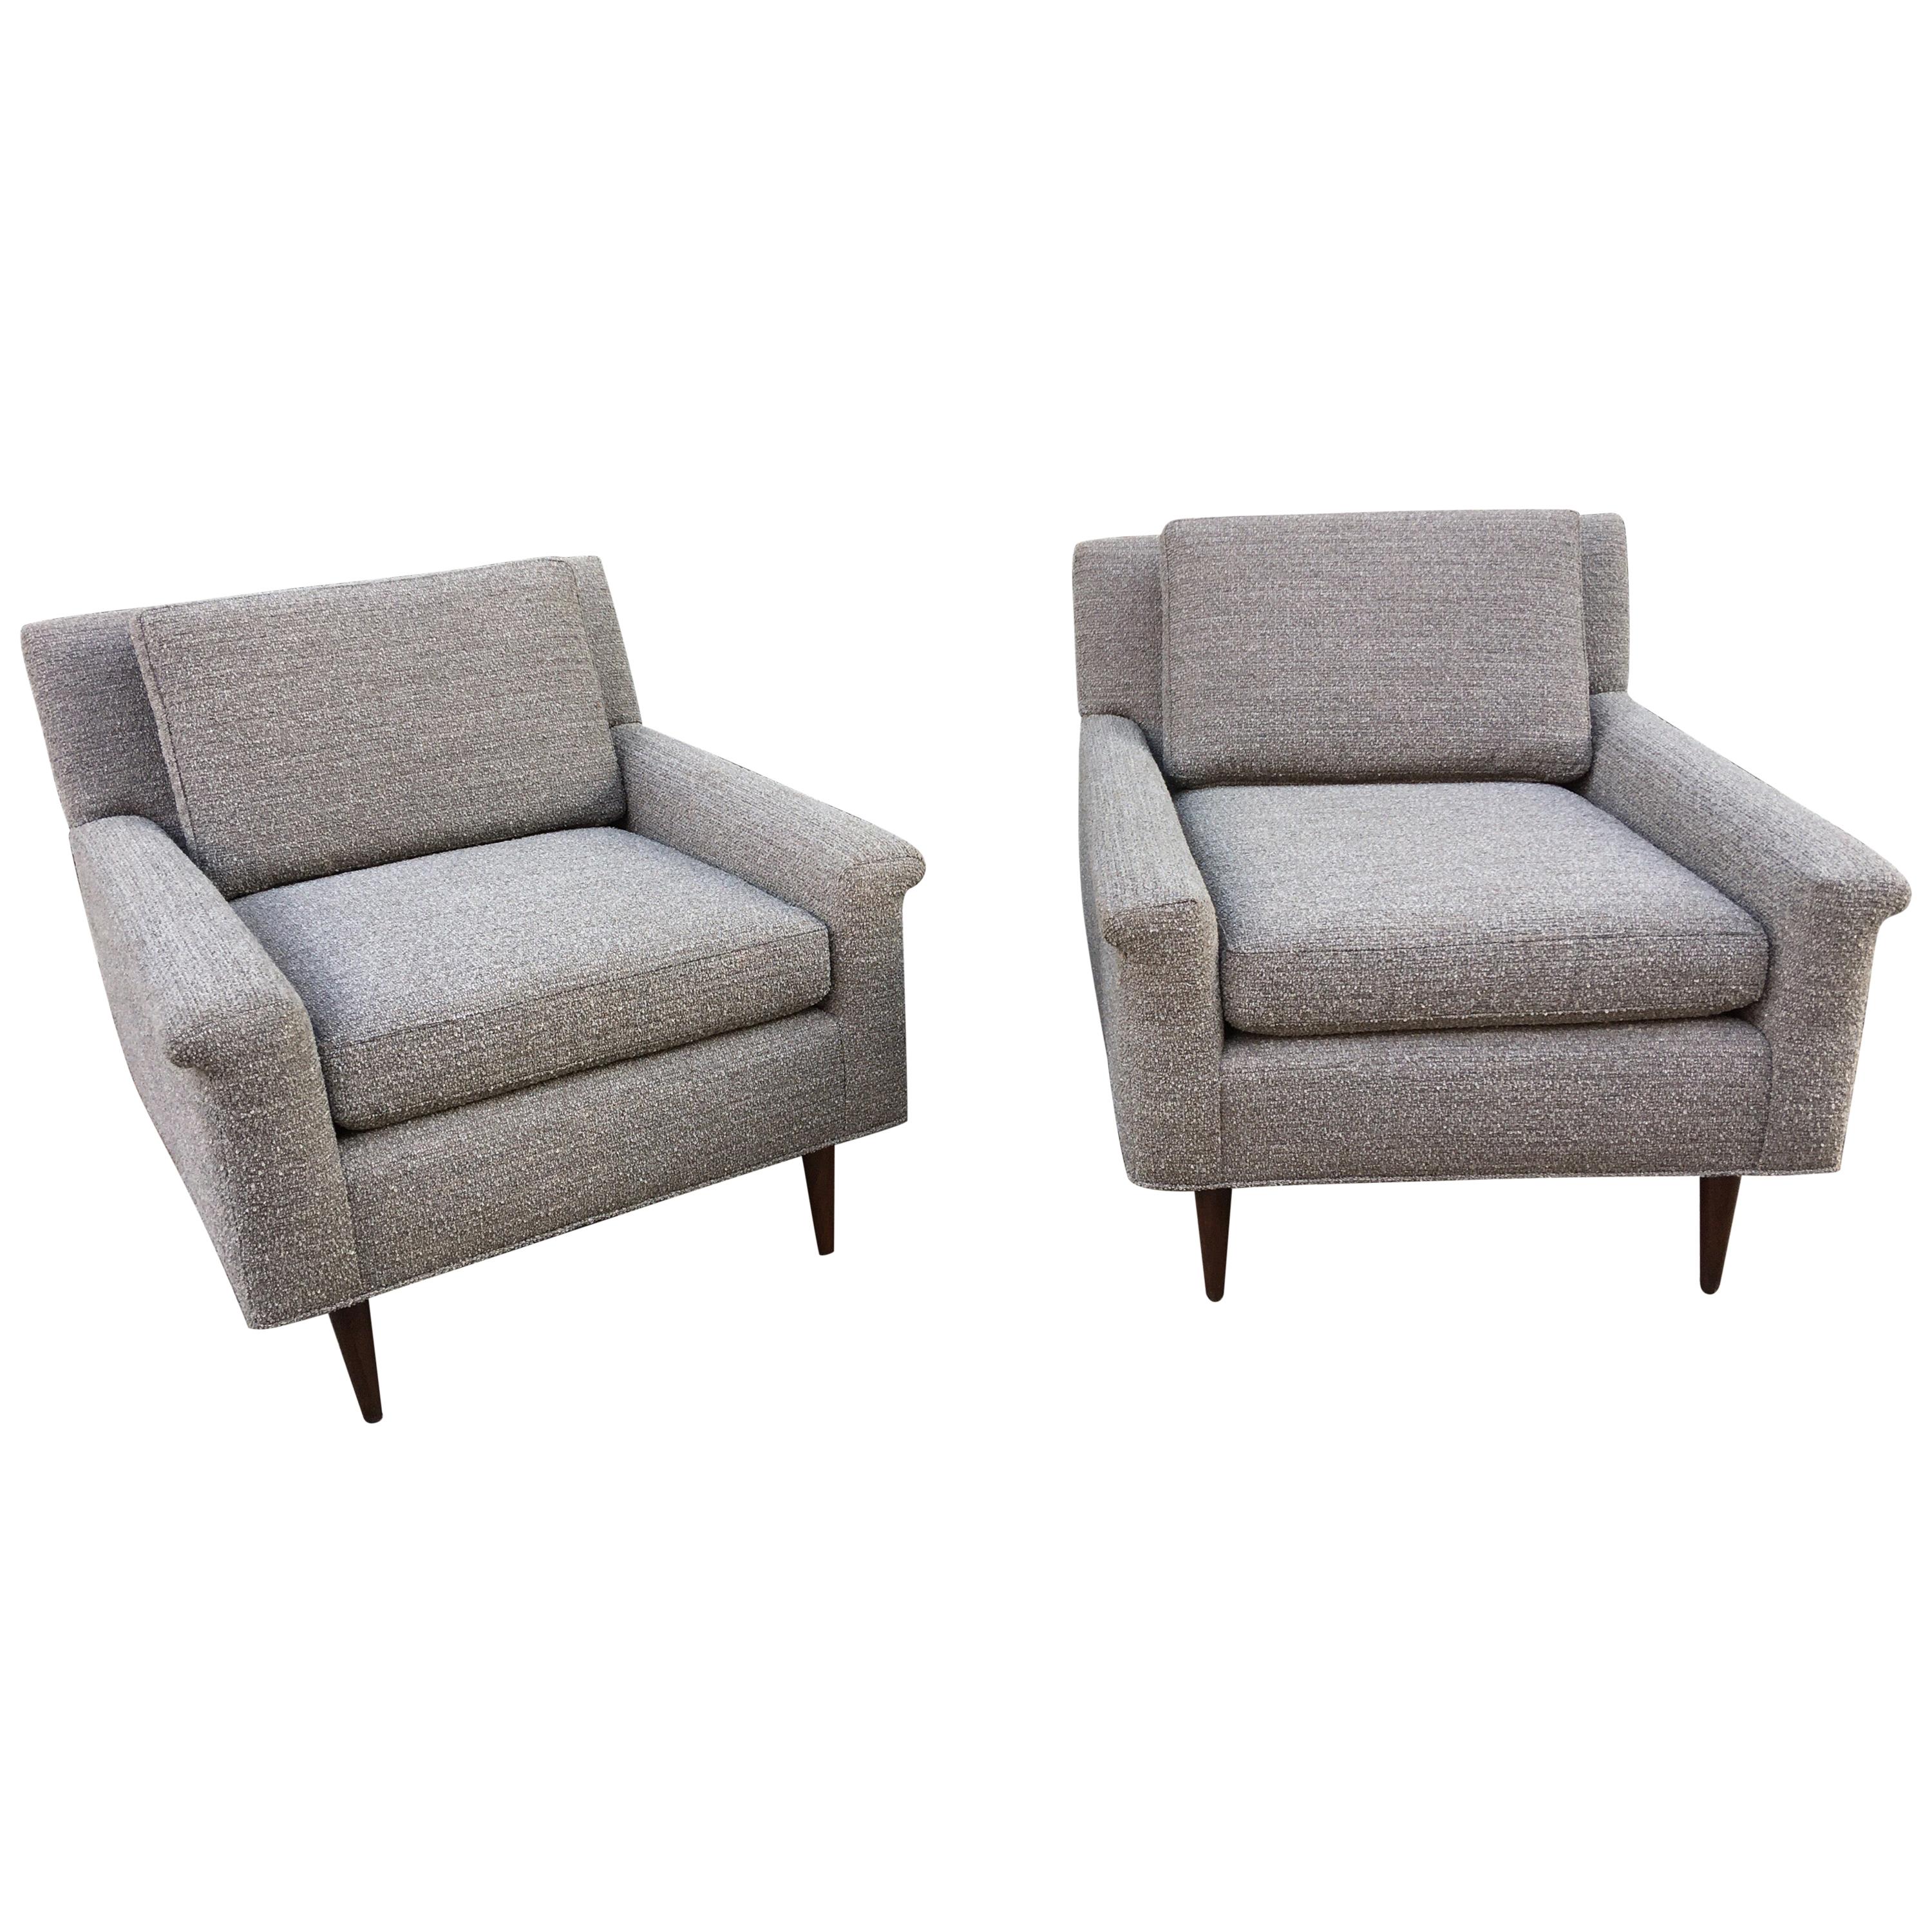 Pair of DUX Lounge Chairs, Newly Upholstered